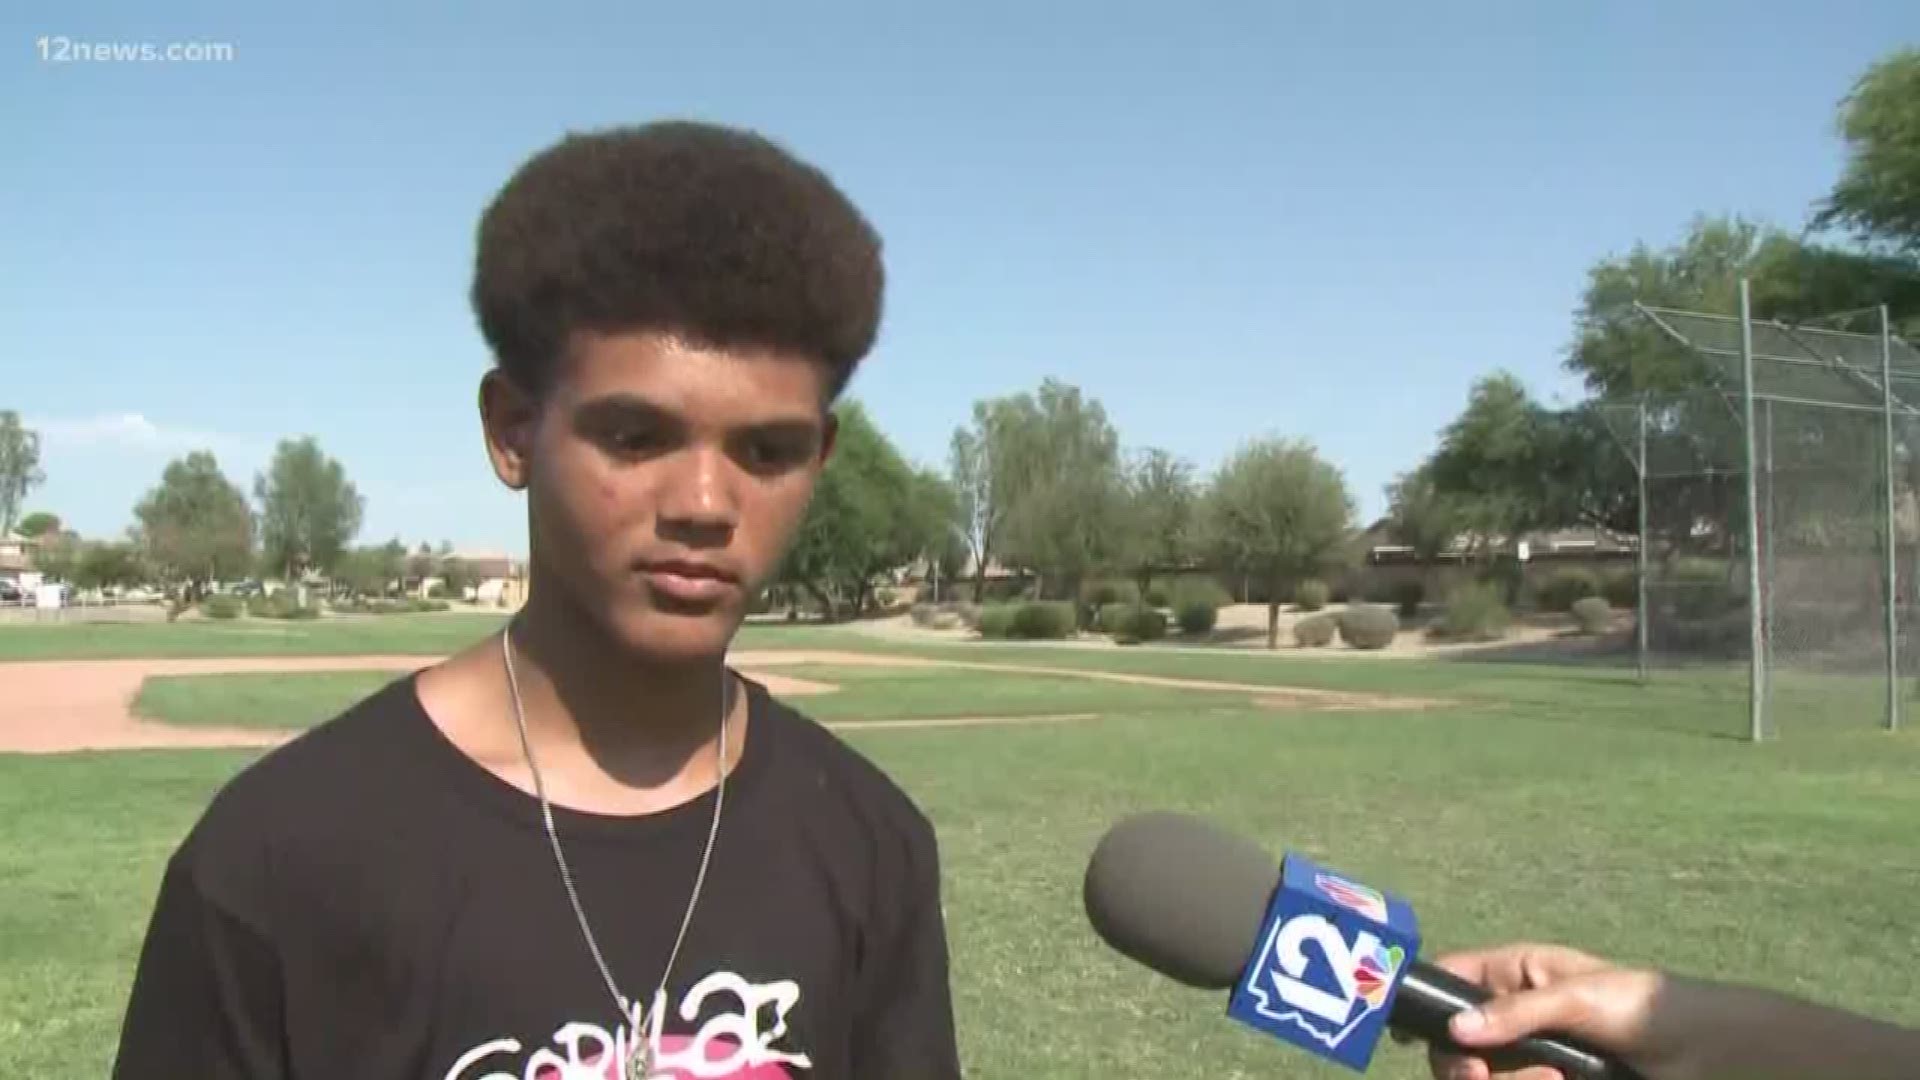 Josiah Wiedman was struck by lightning when walking through a park last week with his friend. 12 News was there when he returned to the park where he was struck.